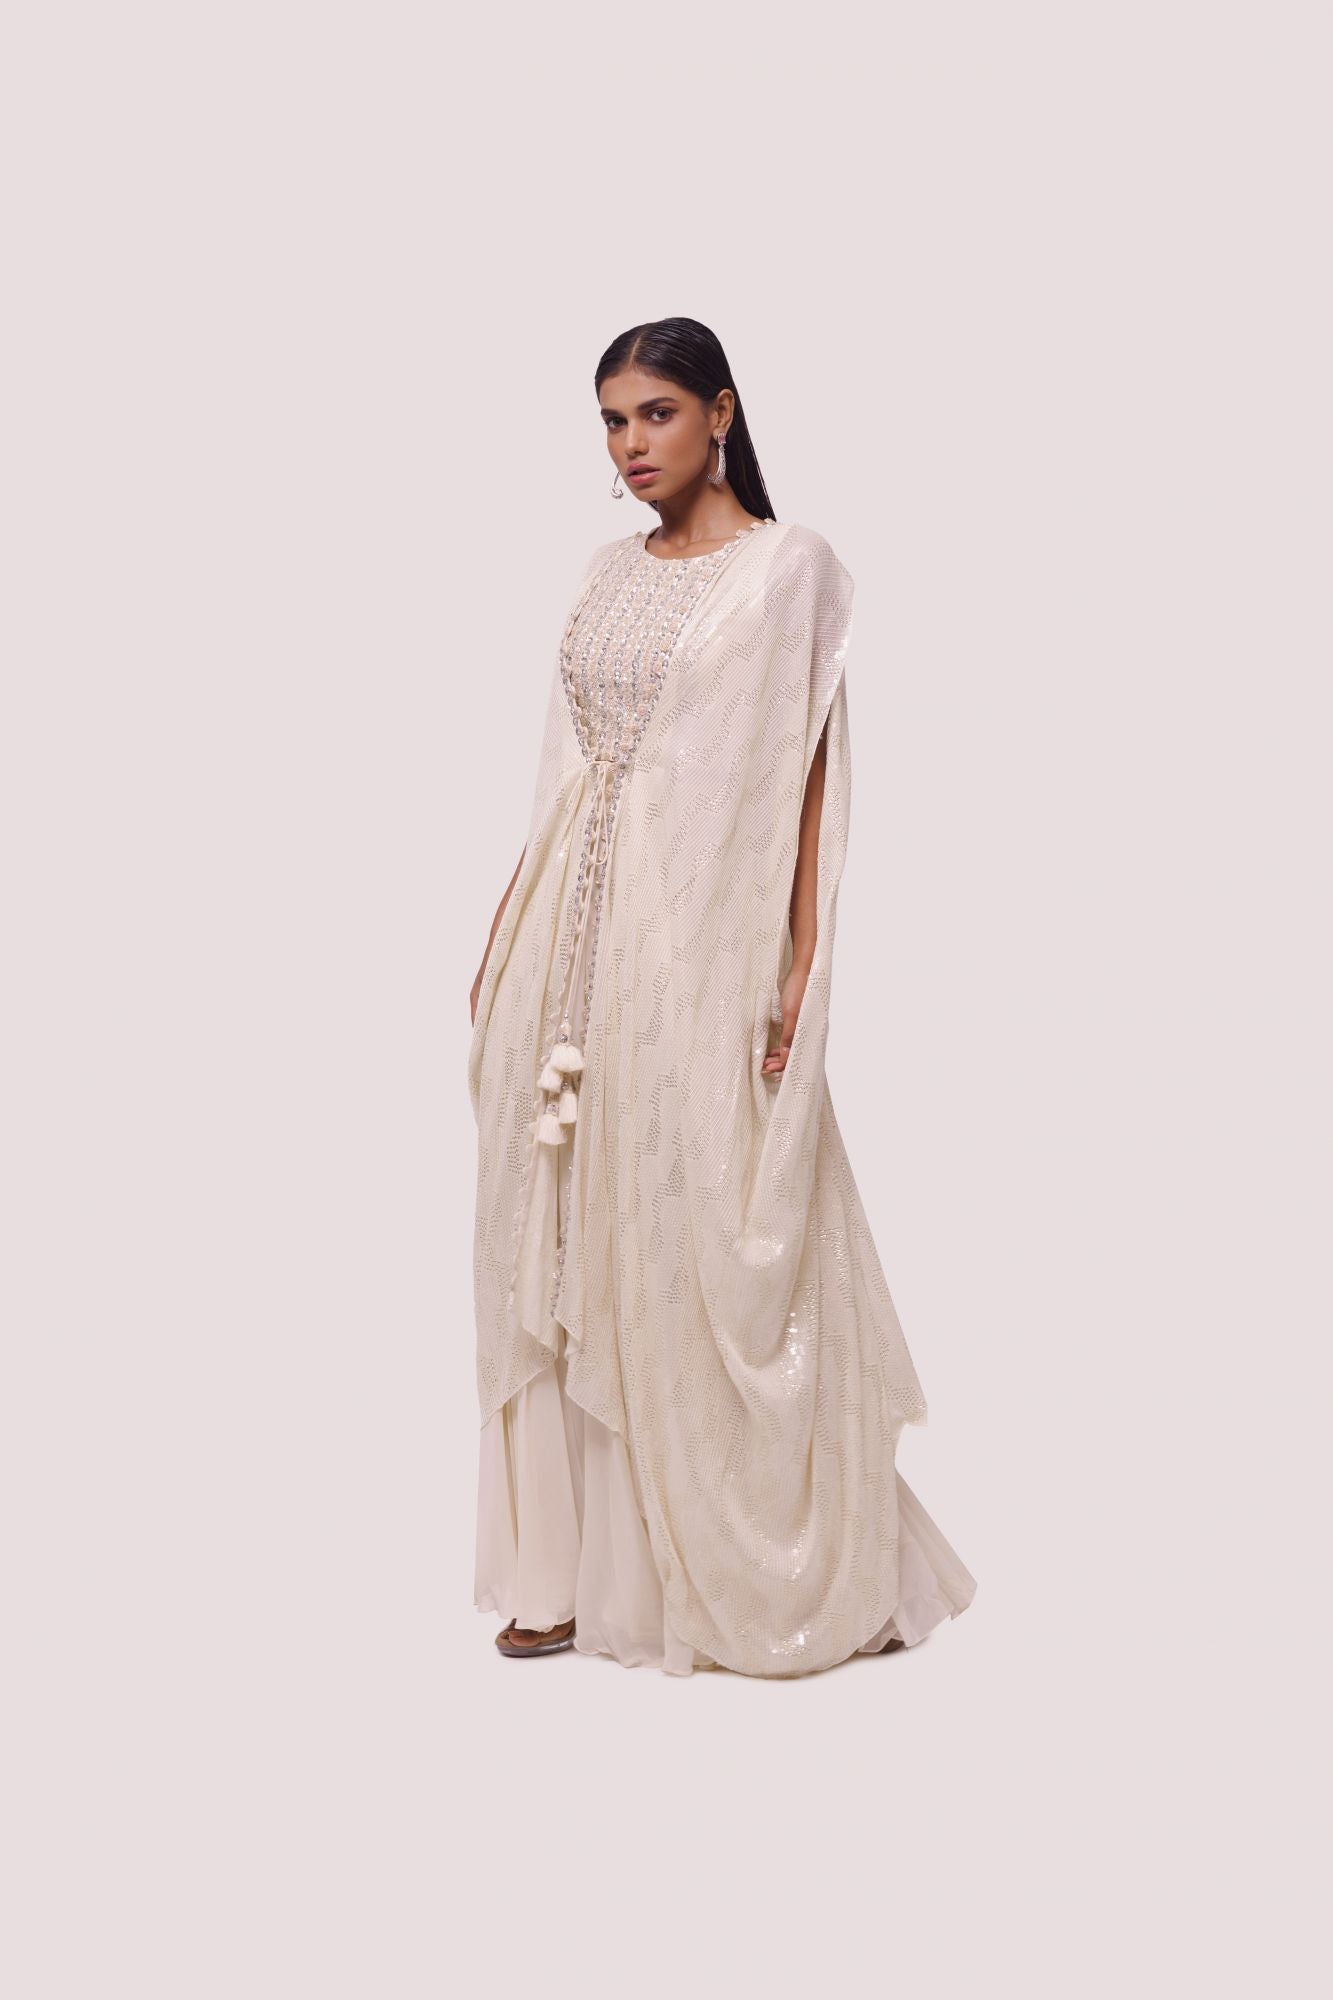 Buy beautiful cream chikan and georgette embellished Indowestern set online in USA. Shop the best and latest designs in embroidered sarees, designer sarees, Anarkali suit, lehengas, sharara suits for weddings and special occasions from Pure Elegance Indian fashion store in USA.-set